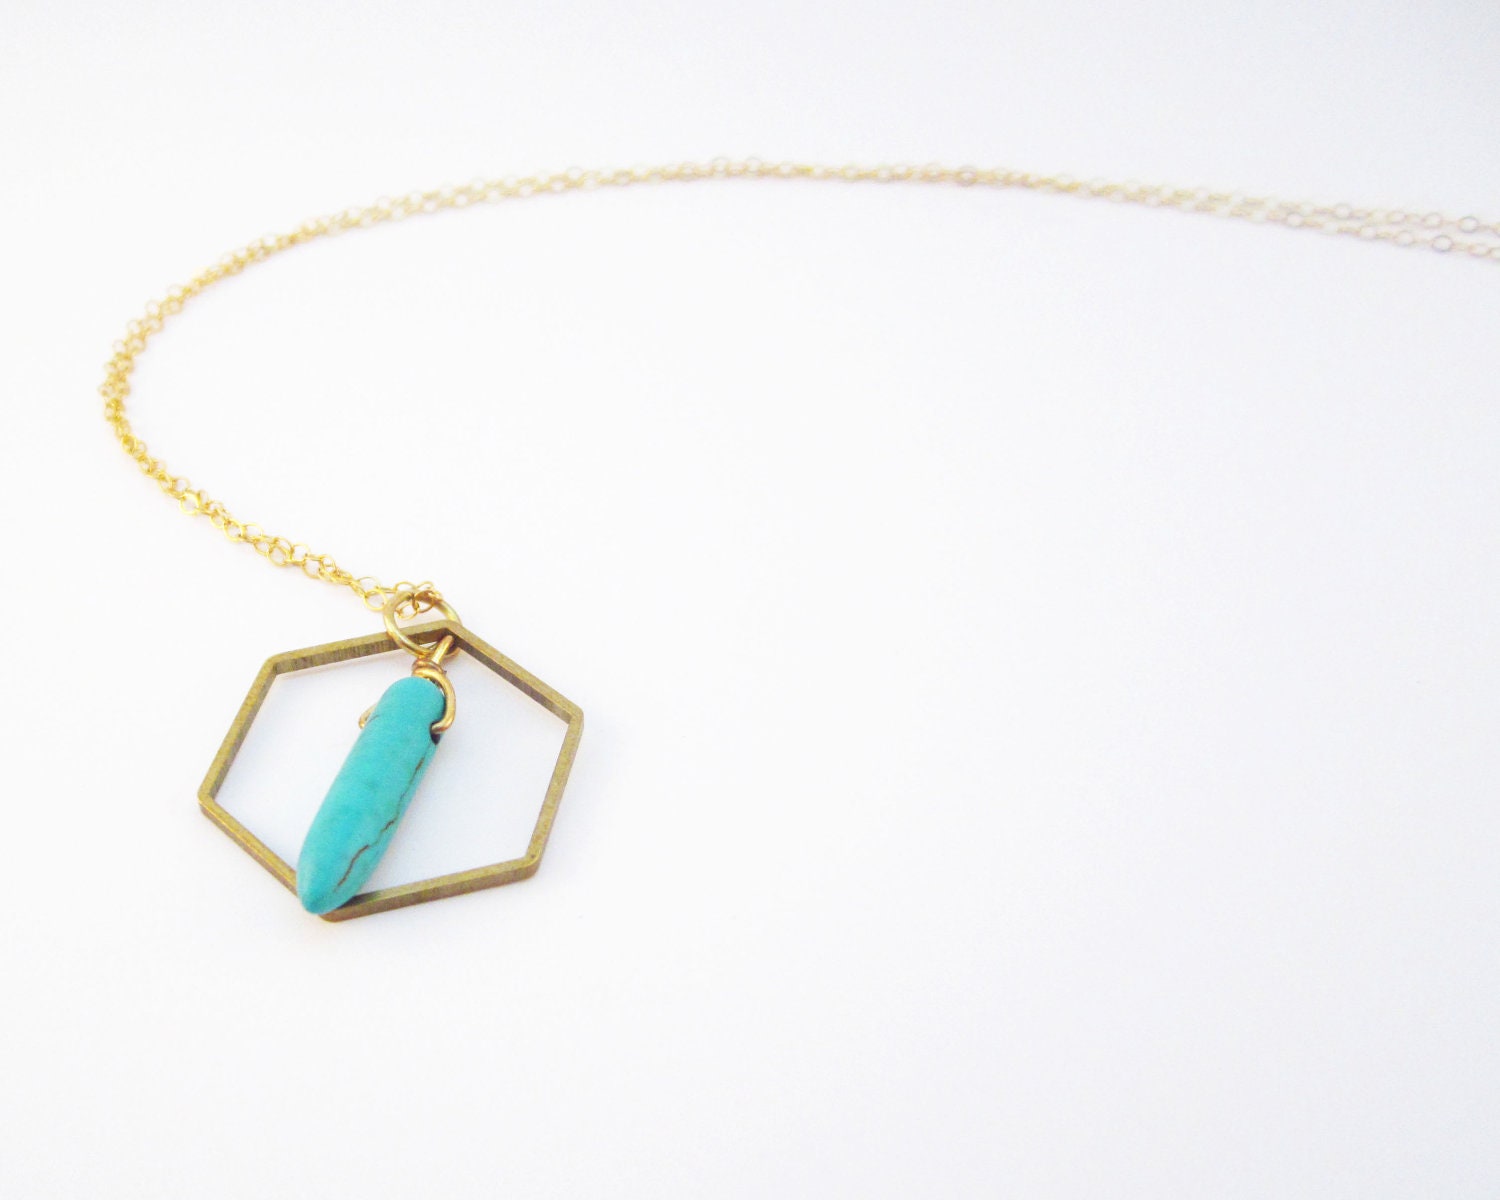 Hexagon Turquoise Necklace 14k Gold Filled Chain Everyday and Layering   Christmas Holiday 2012 - LaurenRoseJewlers